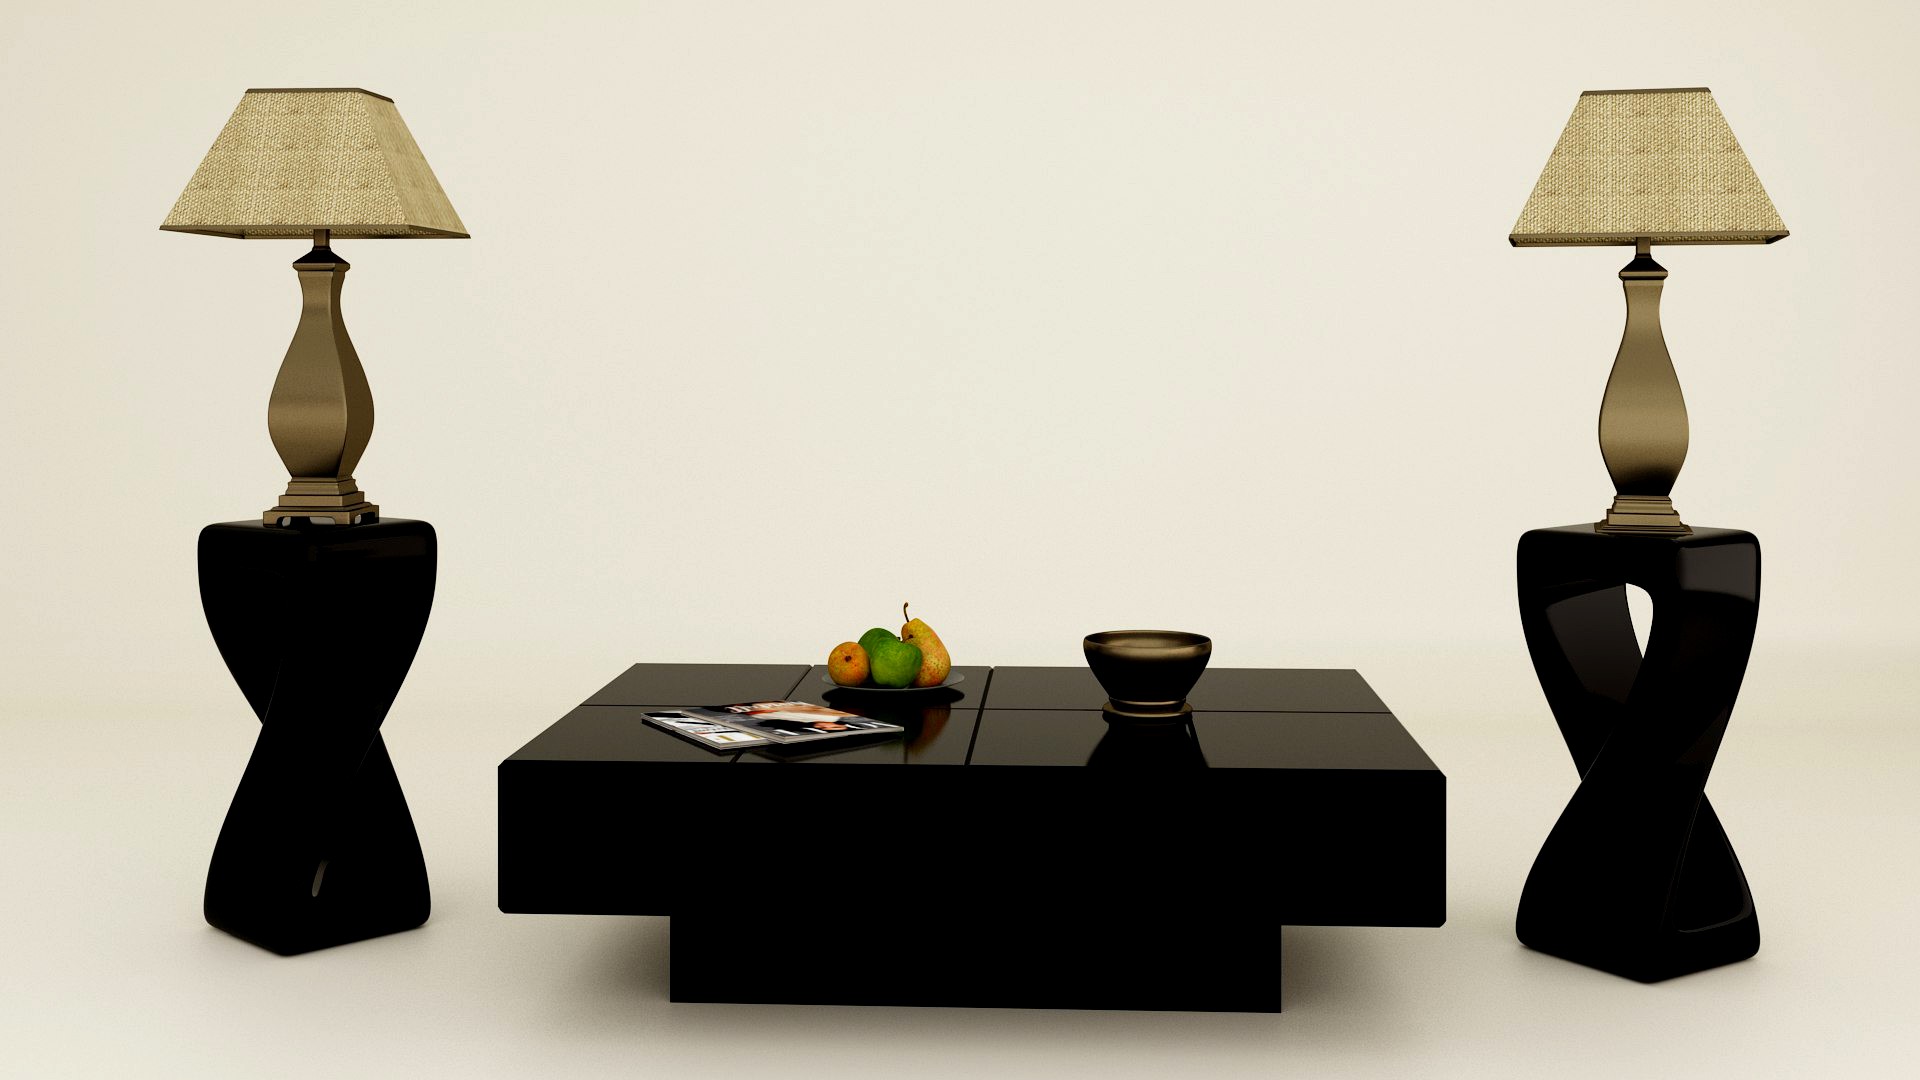 Glossy Black Tea Table and Lampshade